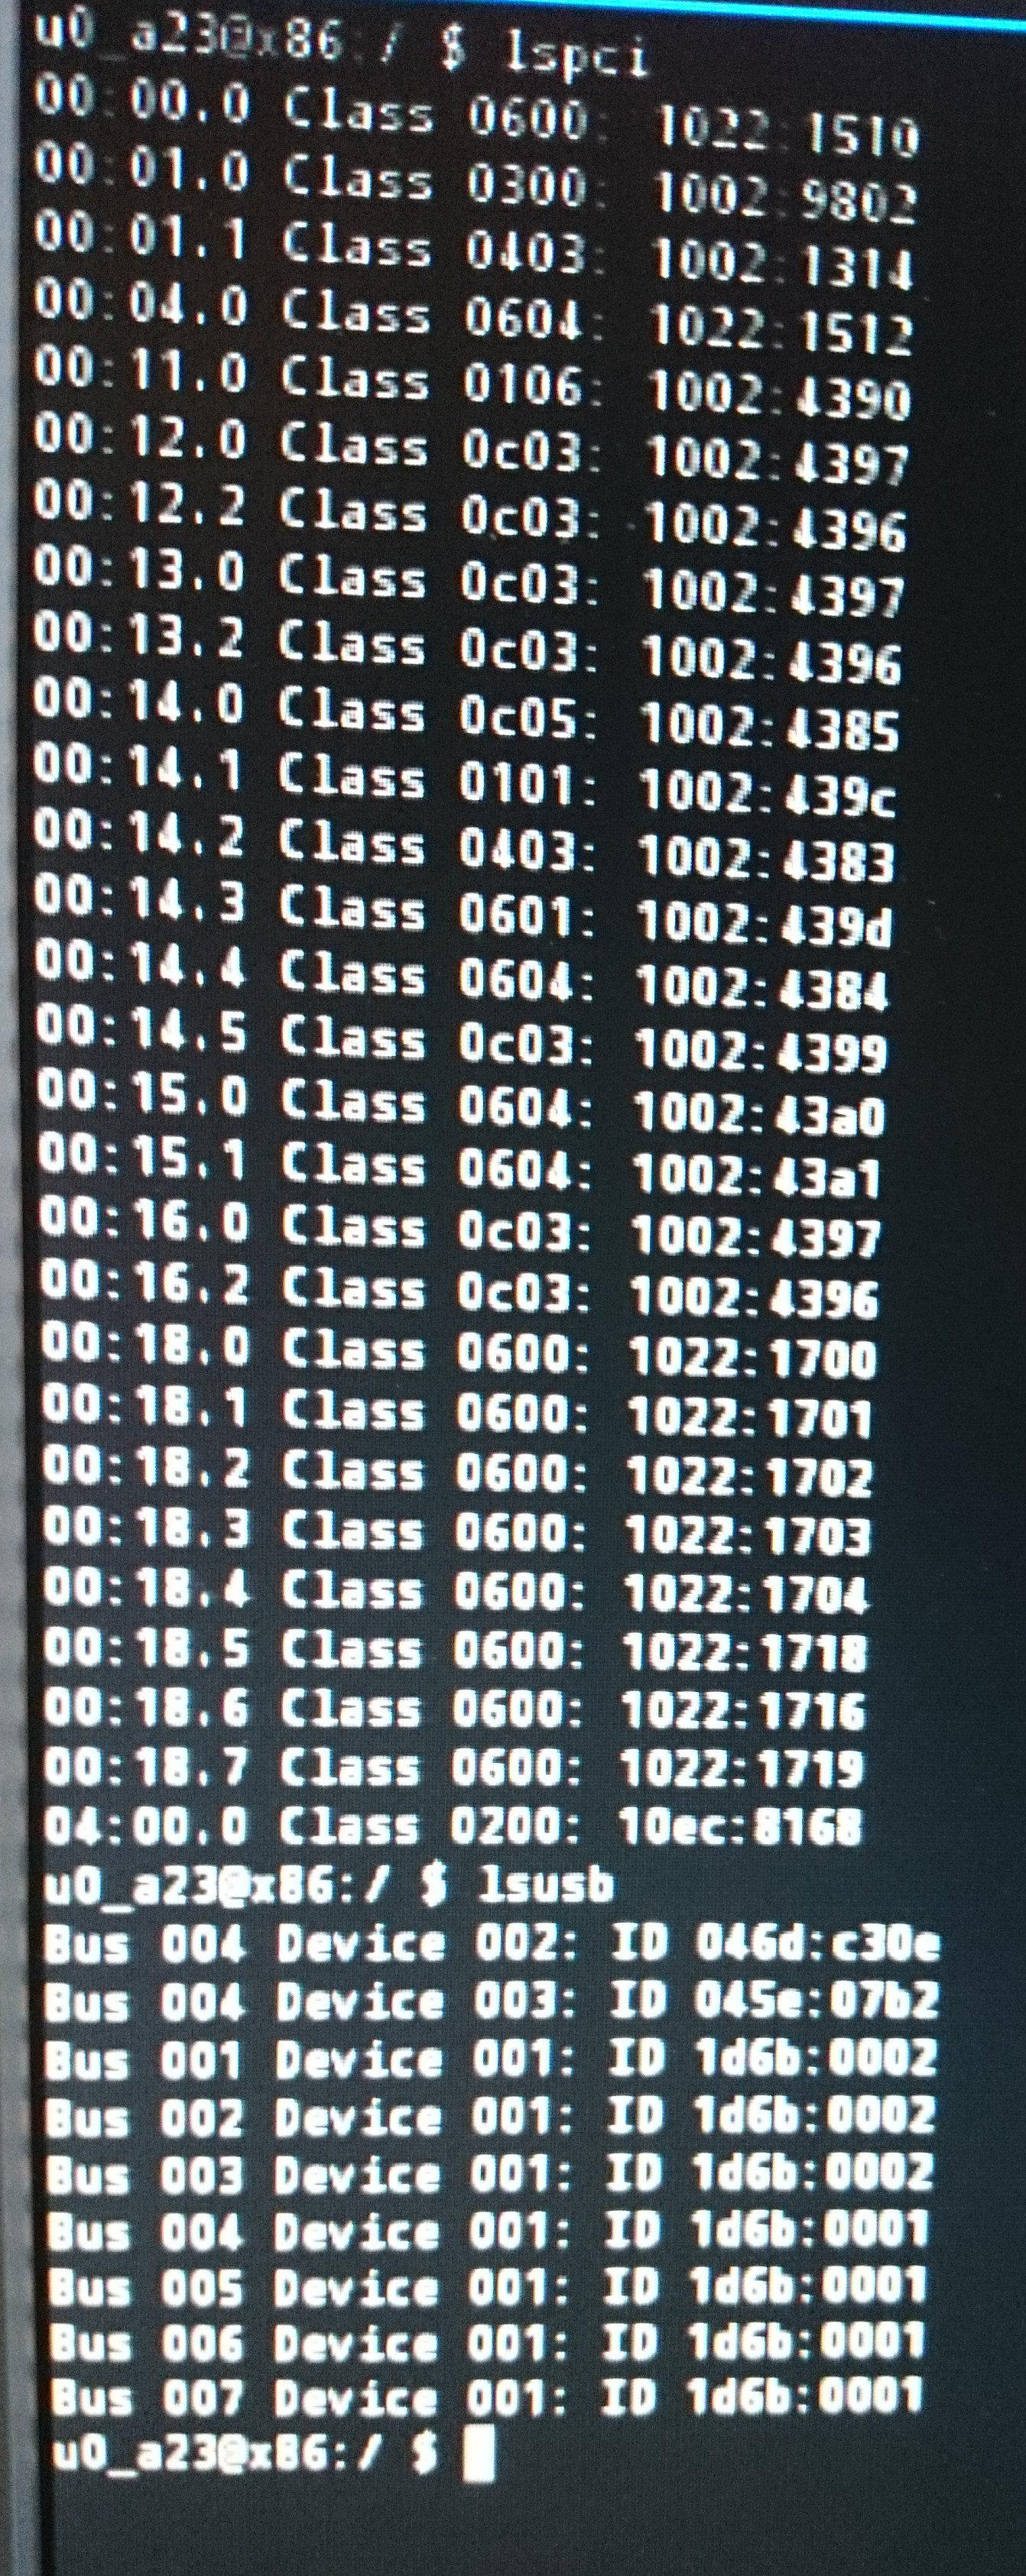 Disobedience Auto floor Unable to boot Android 4.4-R2 on AMD E350 (Brazos) machine